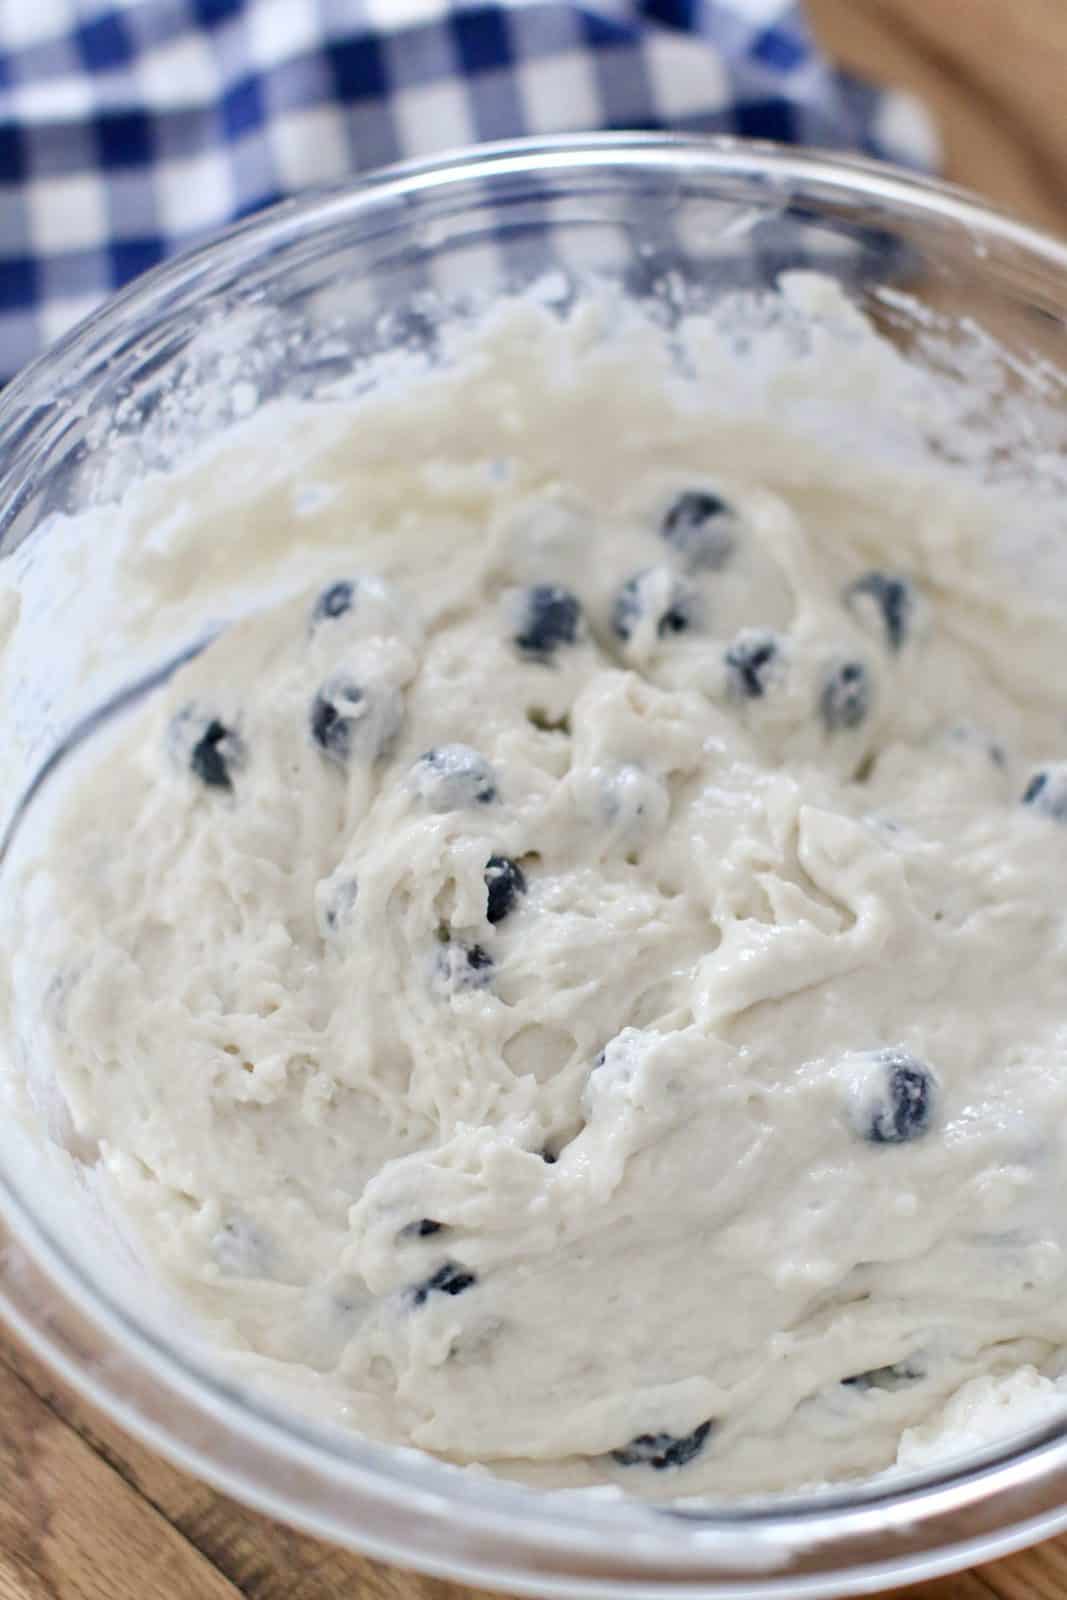 fully combined blueberry biscuit batter in a glass bowl.